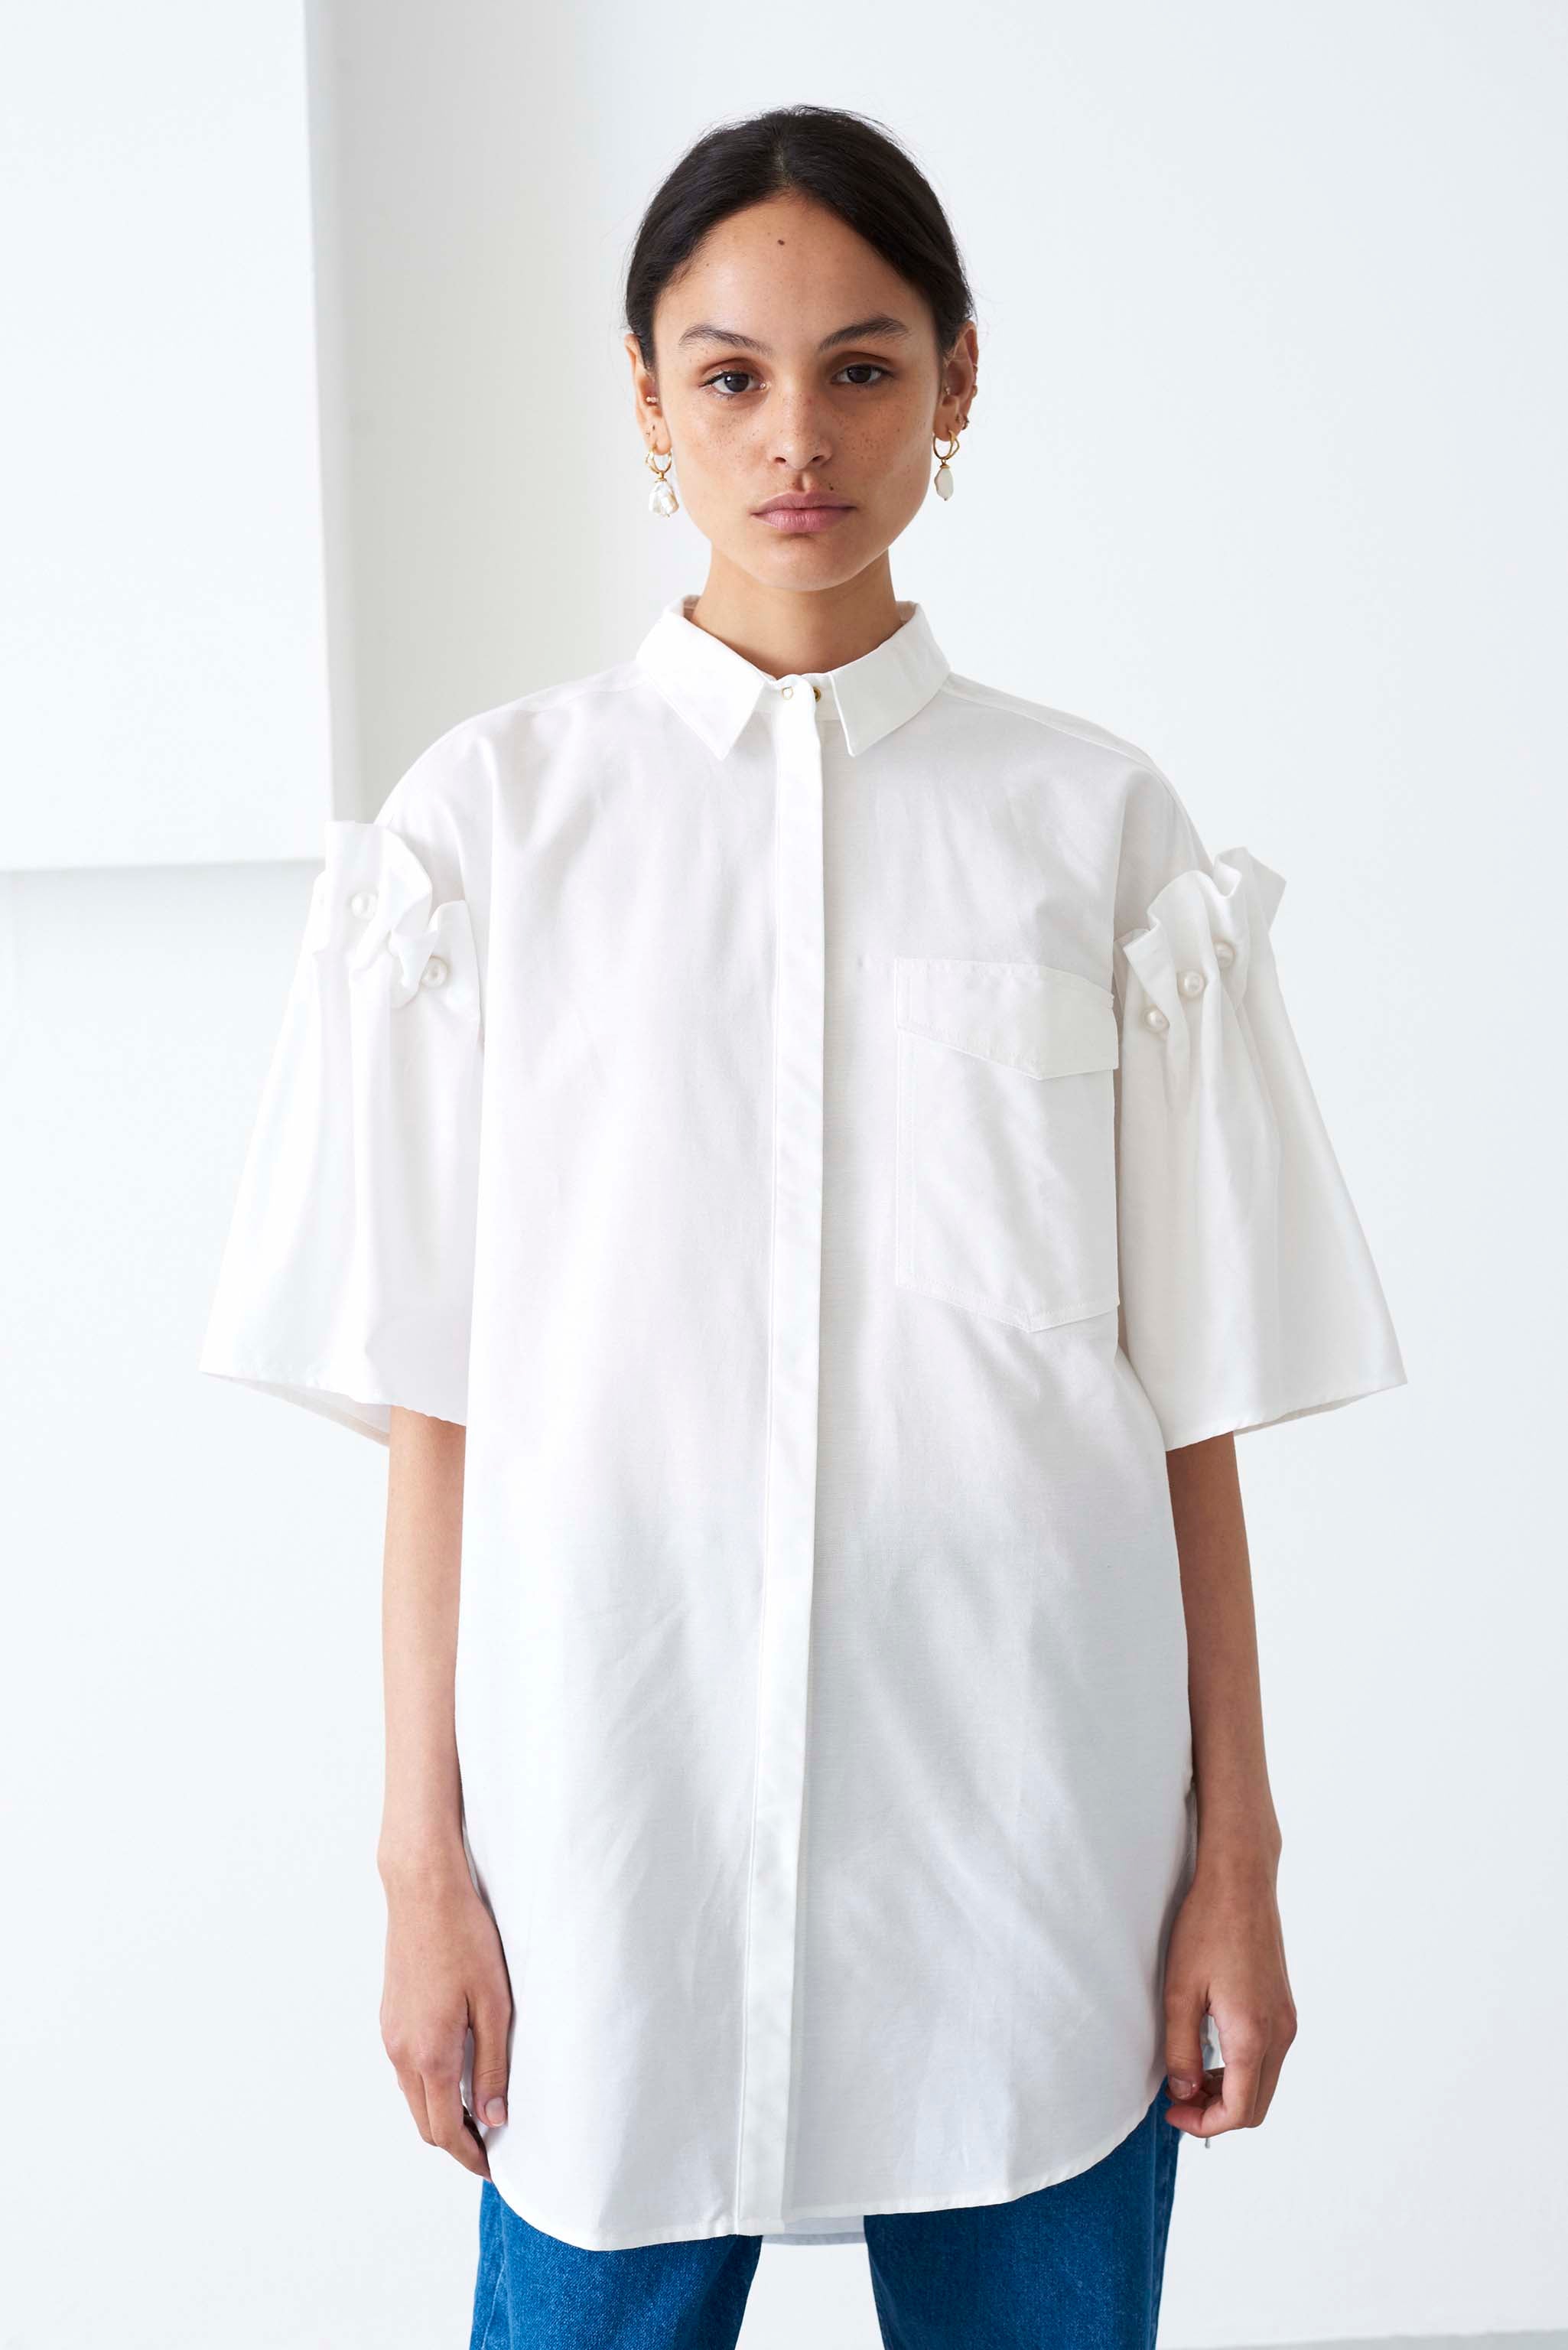 Tops & Shirts - Sustainable Luxury Fashion by Mother of Pearl